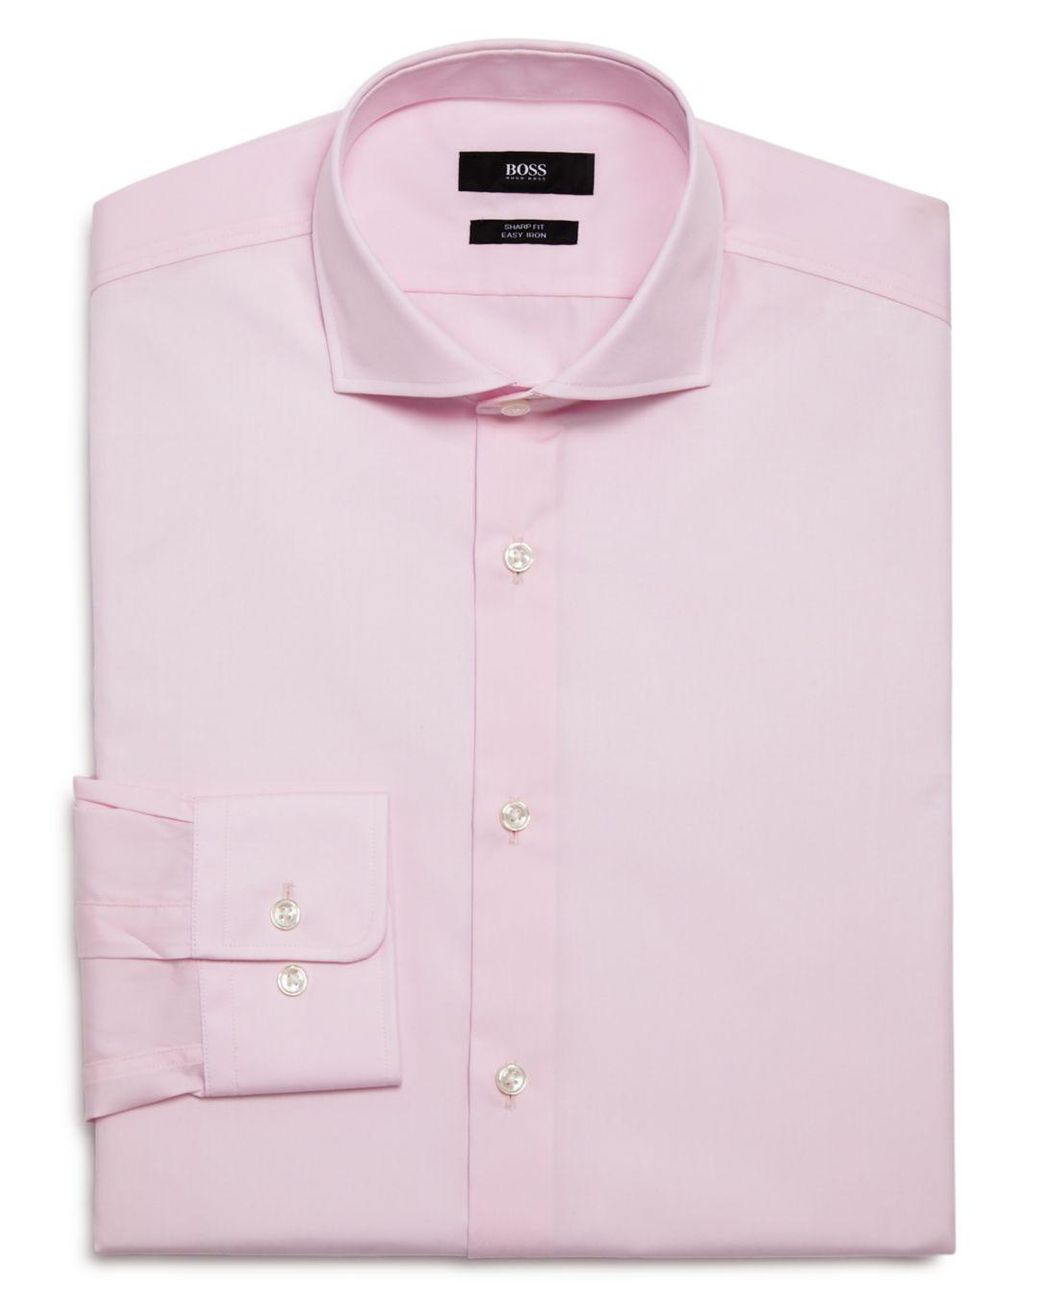 BOSS by Hugo Boss Solid Slim Fit Dress Shirt in Light Pink (Pink) for ...